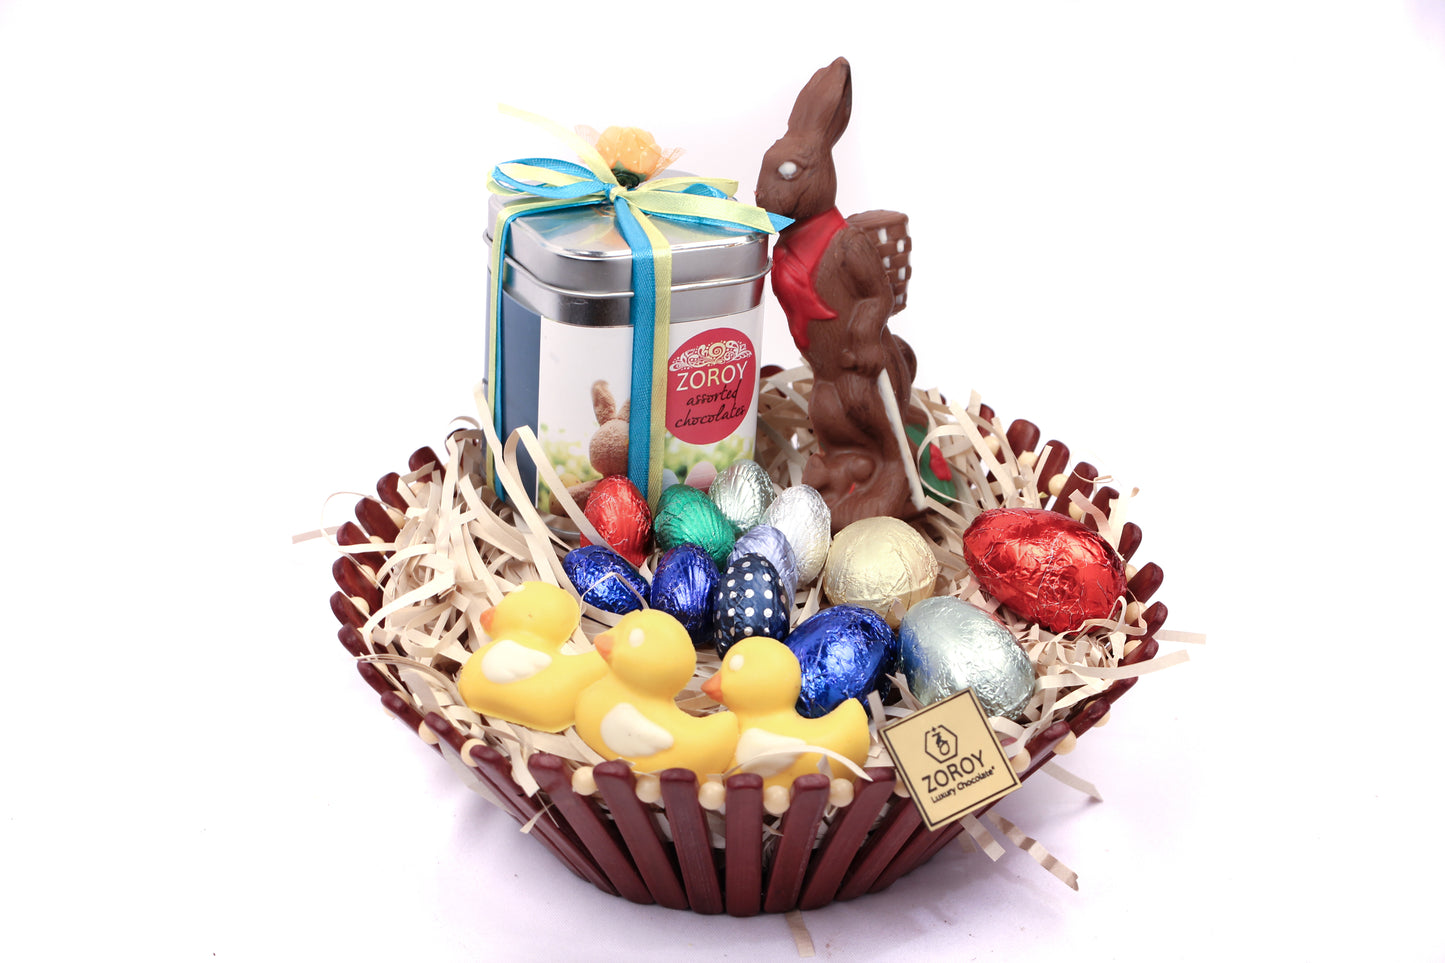 ZOROY Easter Special Round Basket with bunnies, eggs, ducks Gift Hamper - 300 Gms